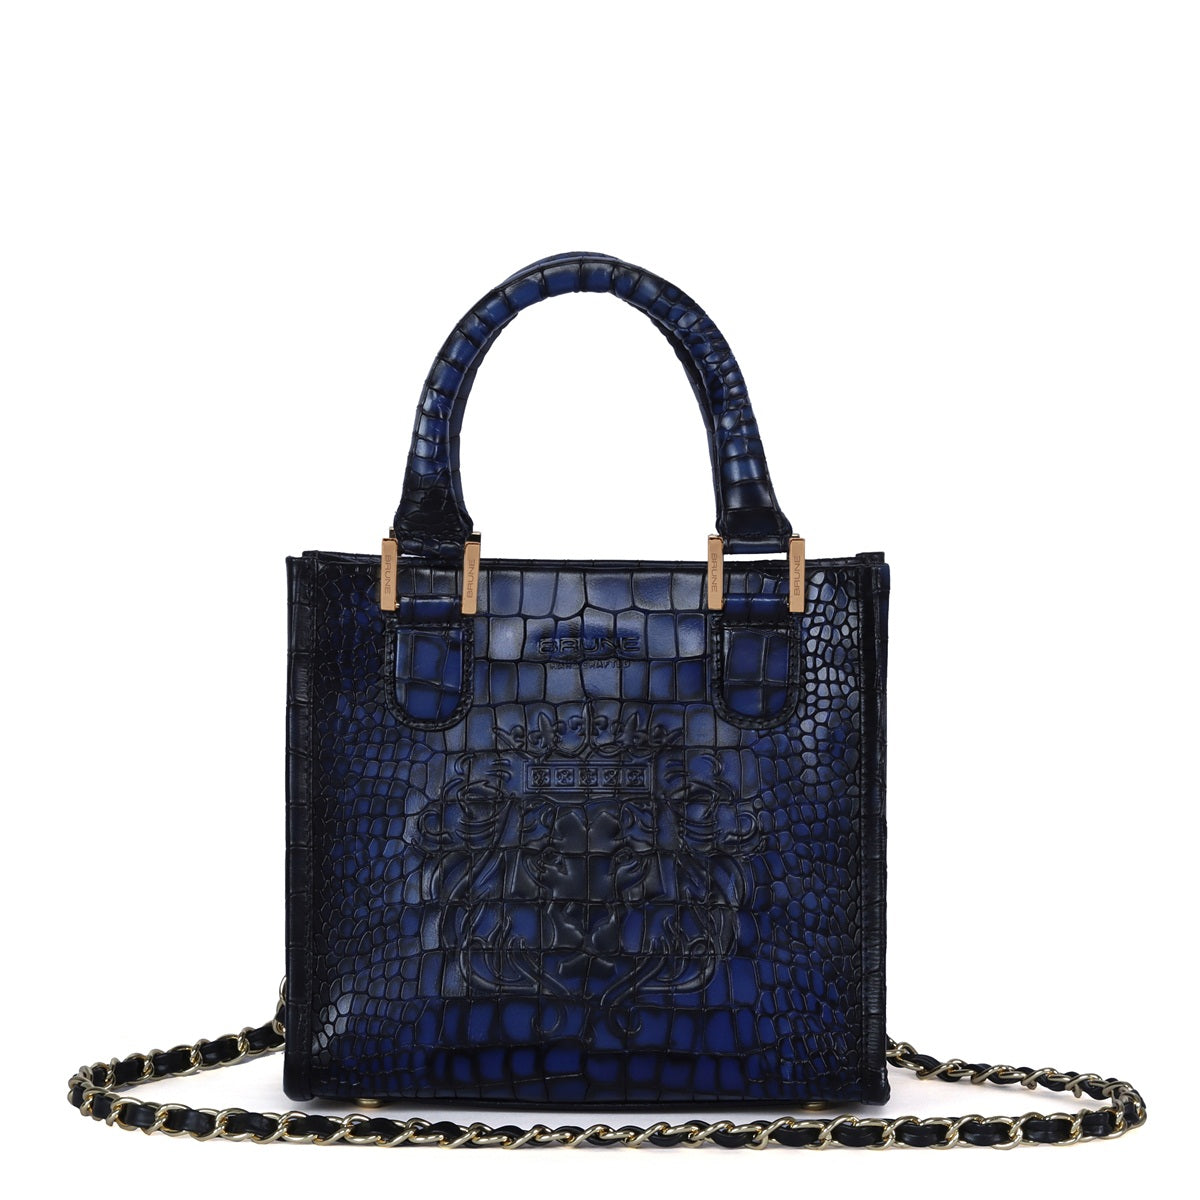 Smokey Finish Small Hand Bag In Deep Cut Blue Leather